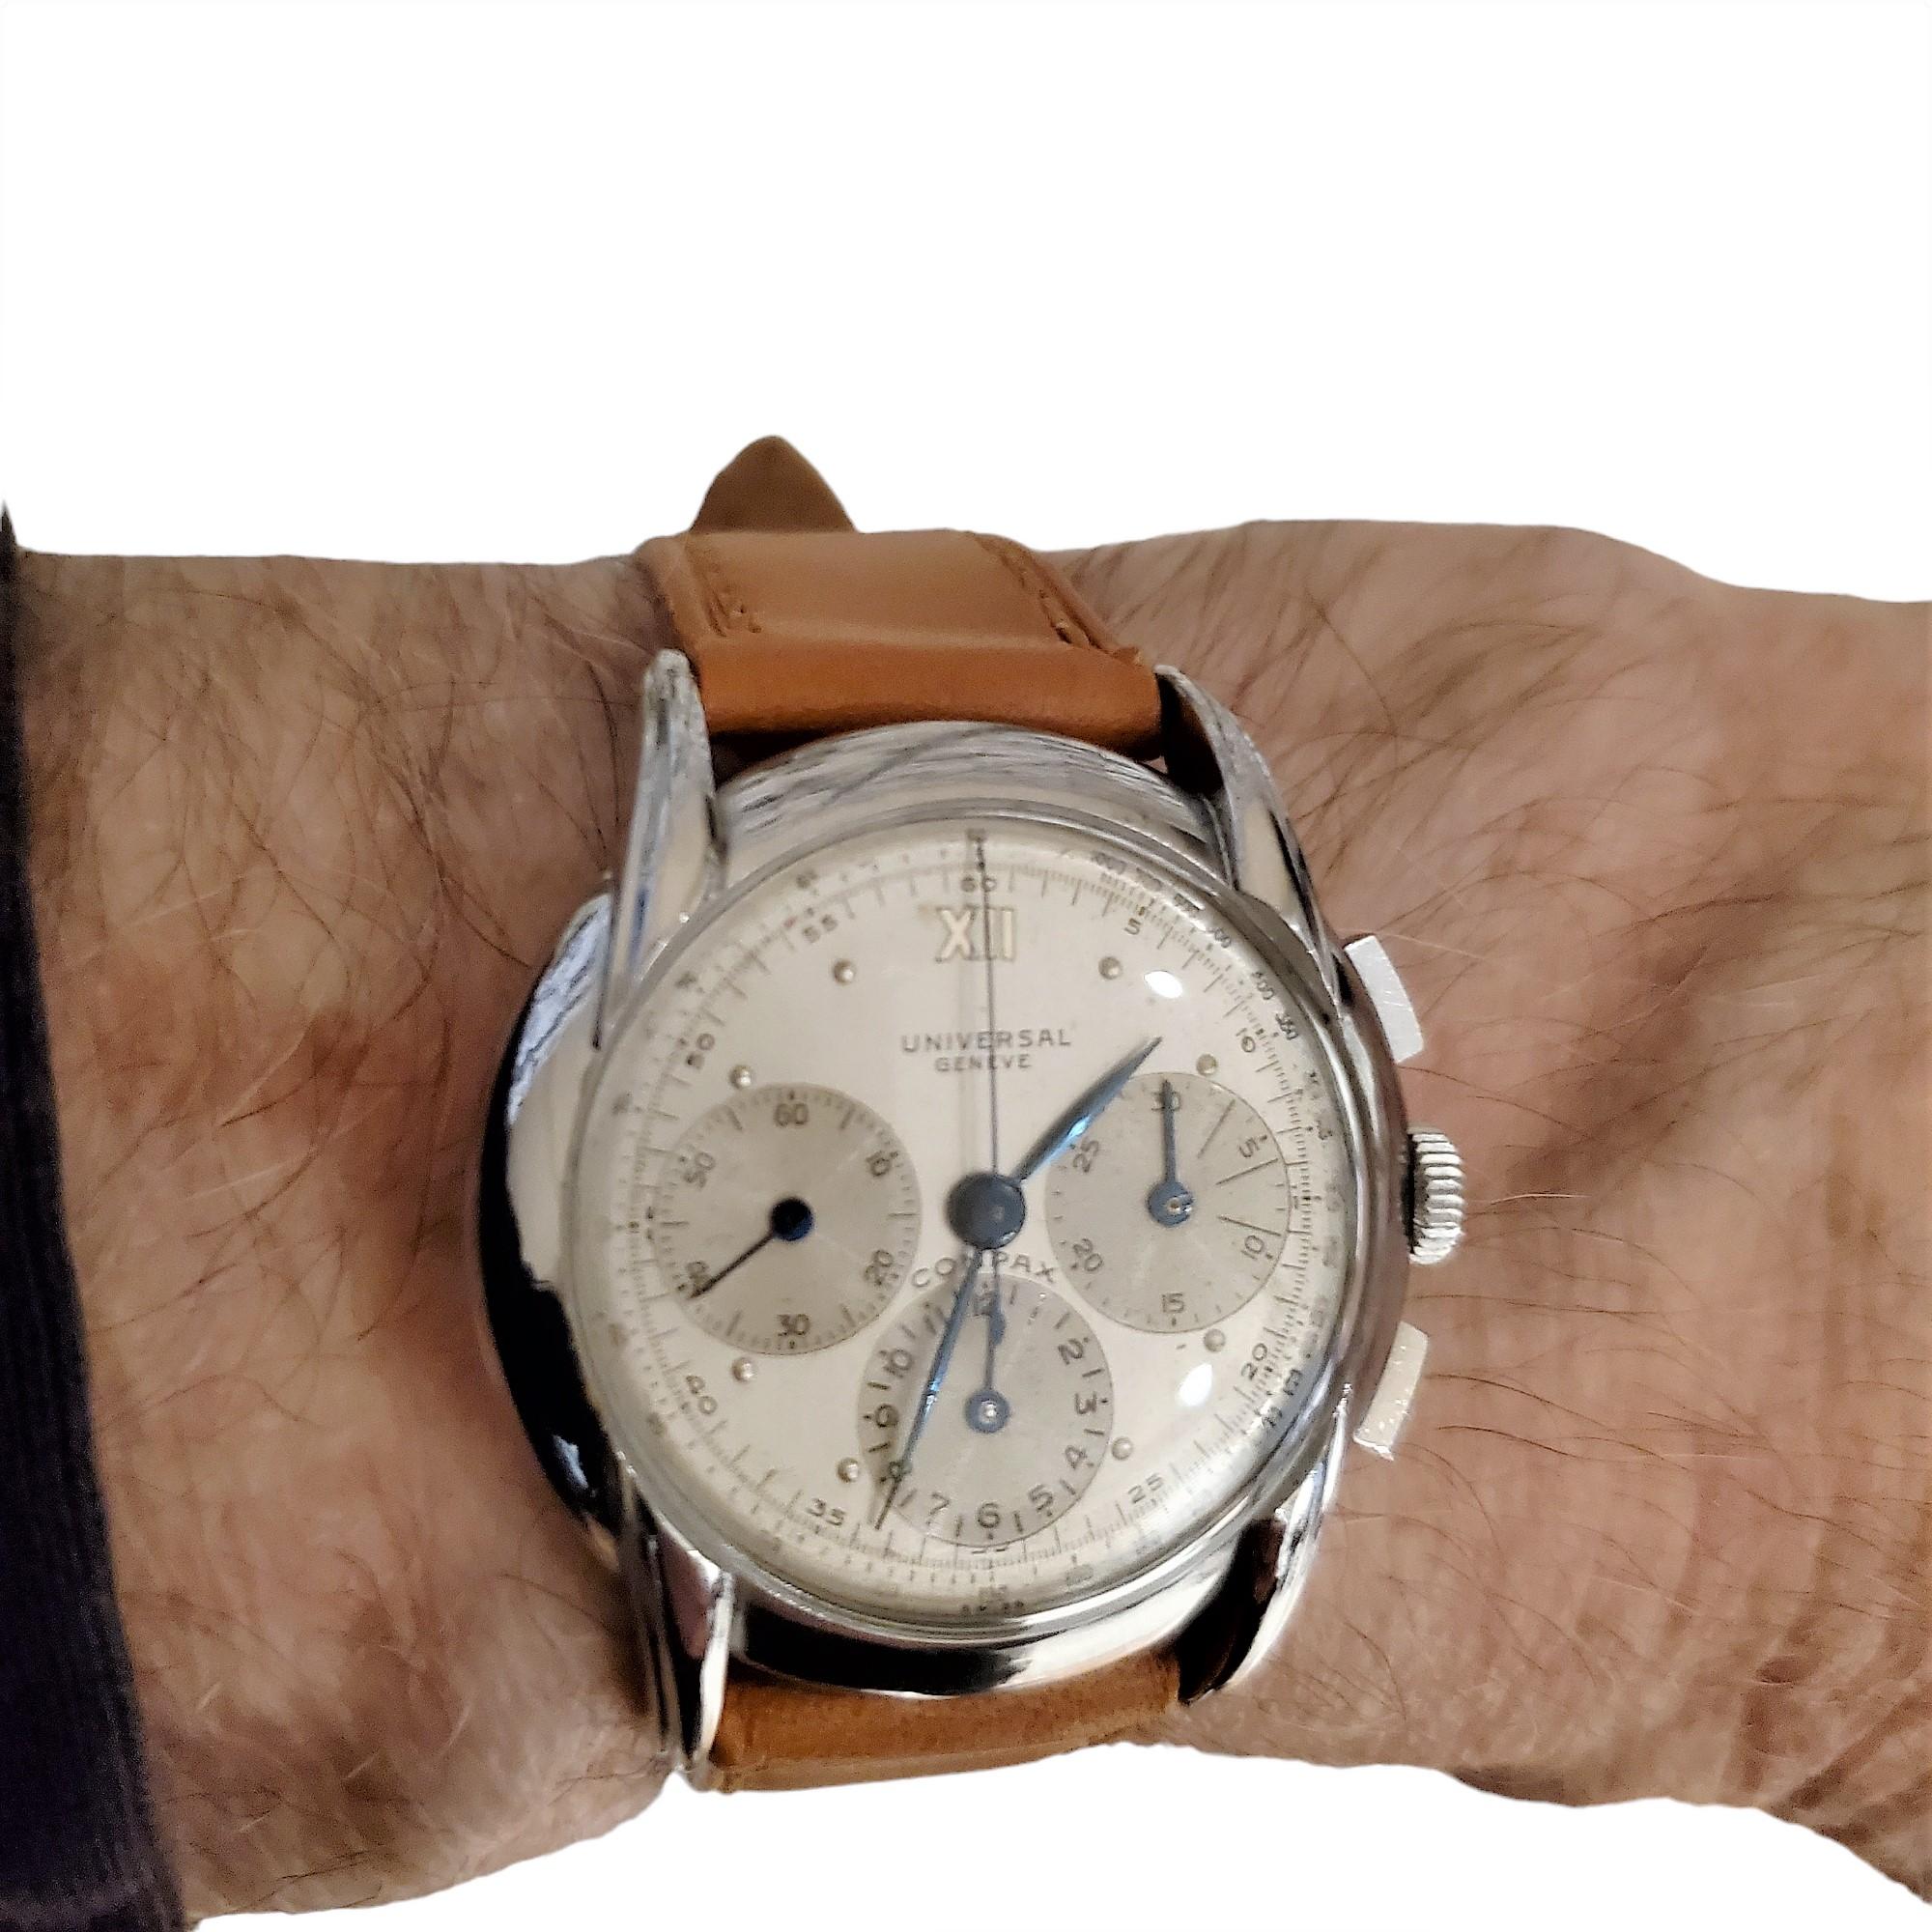 Universal Geneve Compax chronograph Ref. # 22270;  made in stainless steel.  The watch measures 36mm with large fluted turn down lugs, silver two tone dial with a 12 hour recorded dial, 30minute dial and sub second hand.  Condition:  Suburb original